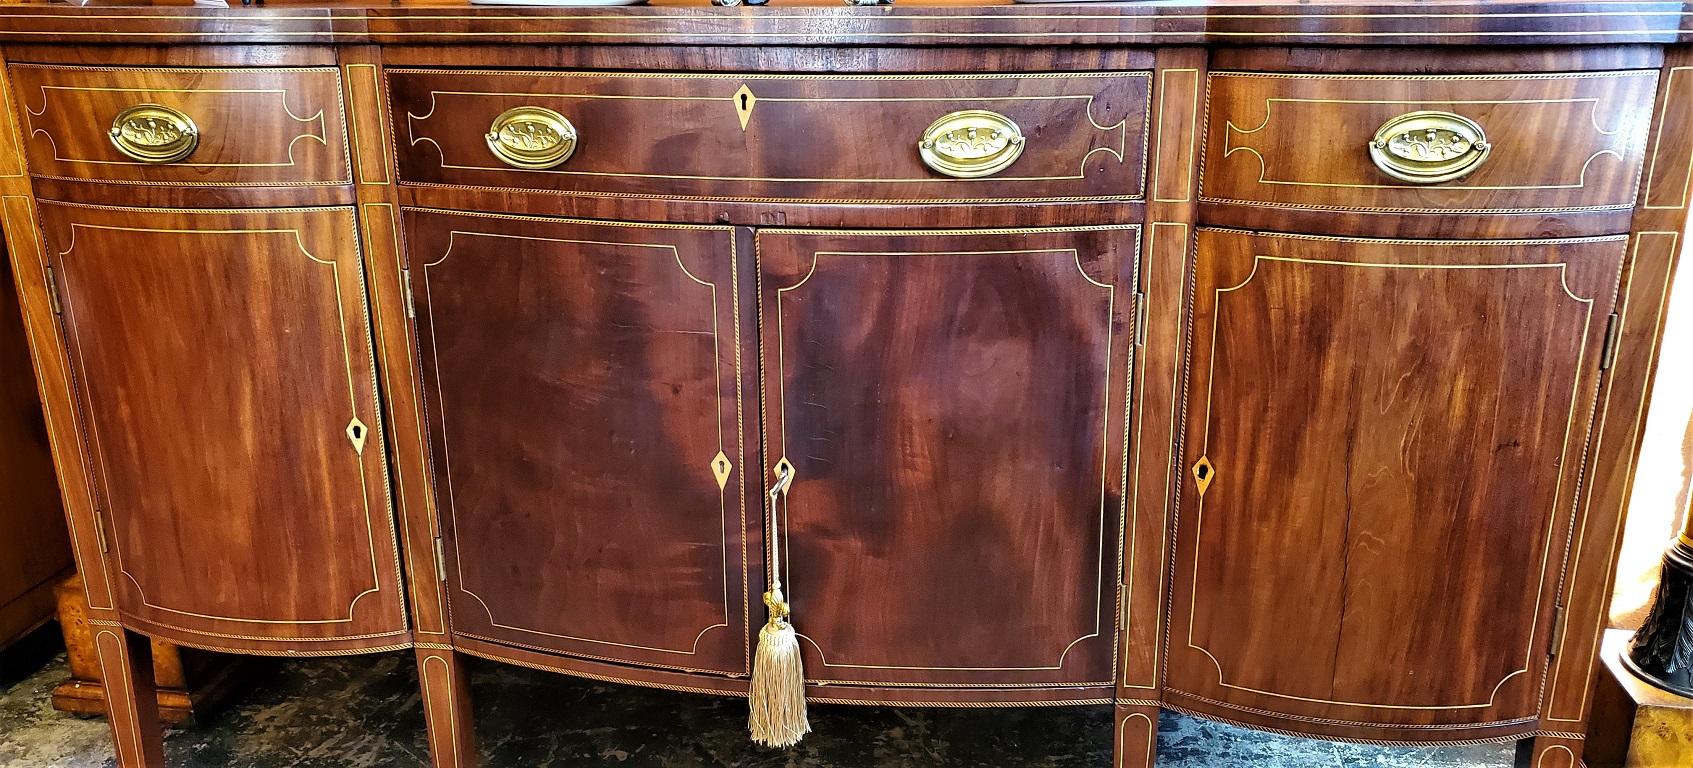 Early 19th Century American Sheraton Sideboard Attributable to Duncan Phyfe For Sale 7